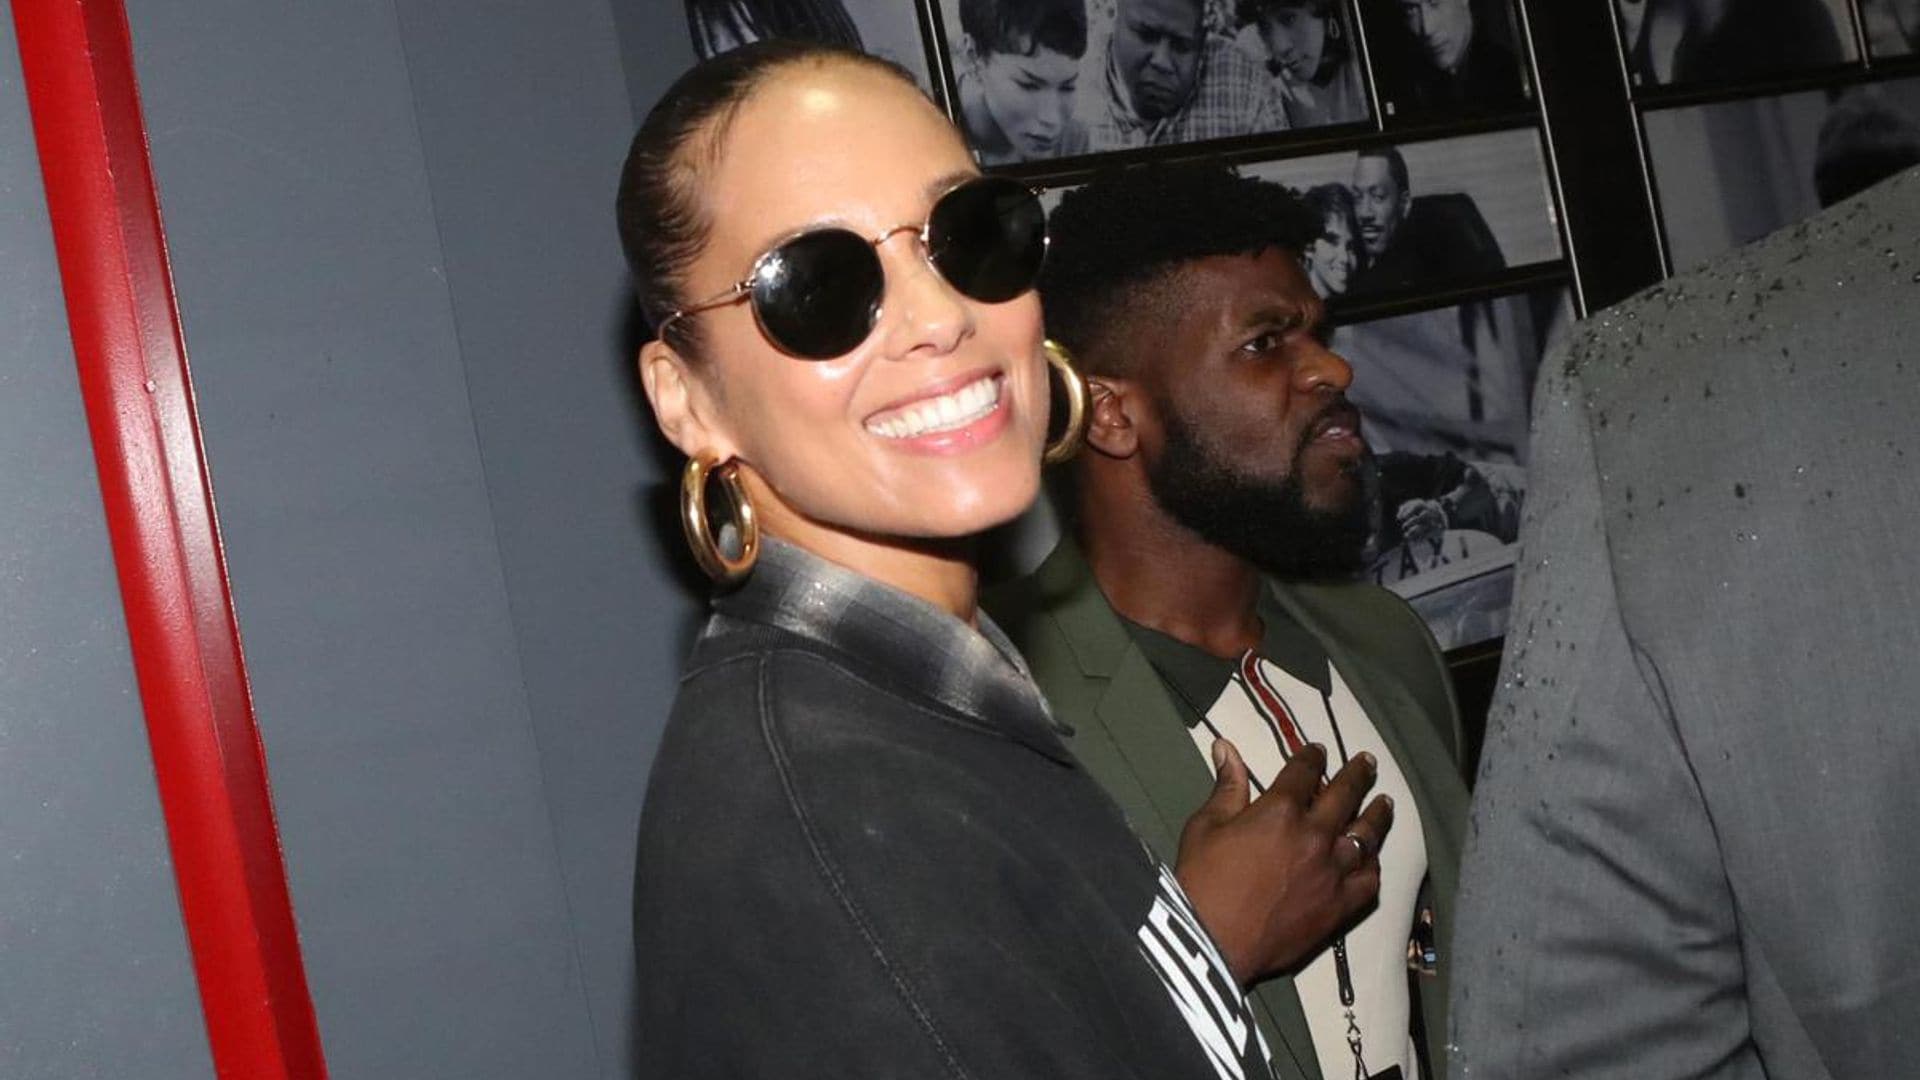 Alicia Keys shows off her abs while she enjoys herself in Bogotá